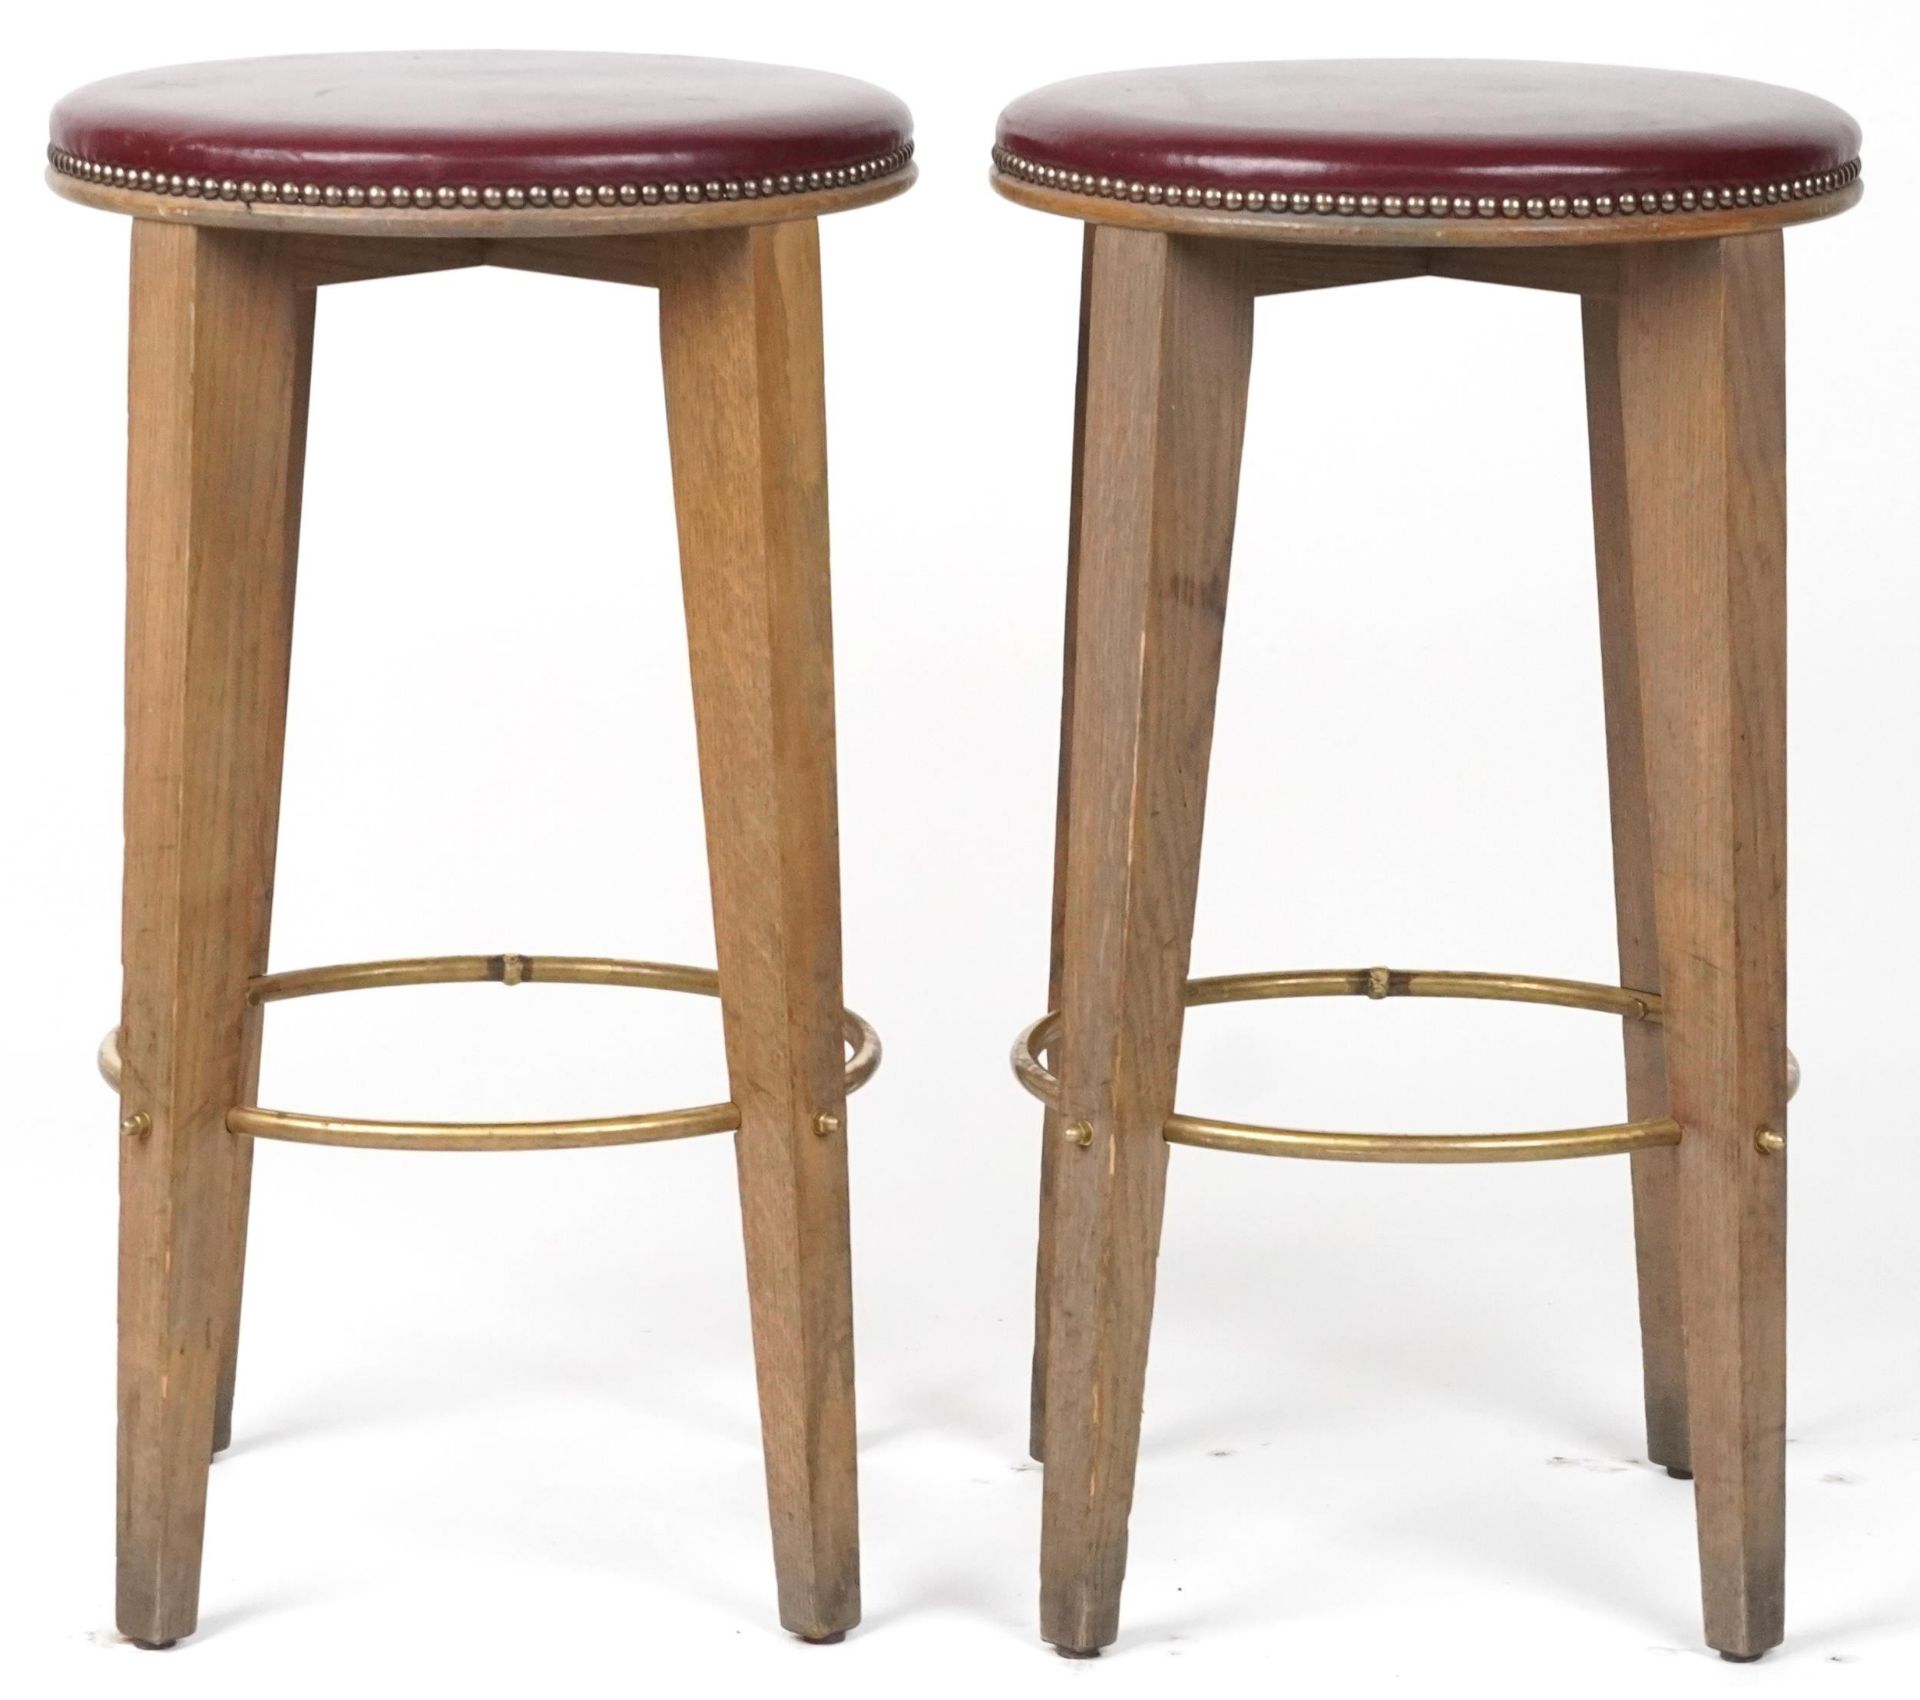 Pair of contemporary breakfast bar stools with burgundy leather upholstered padded seats, each